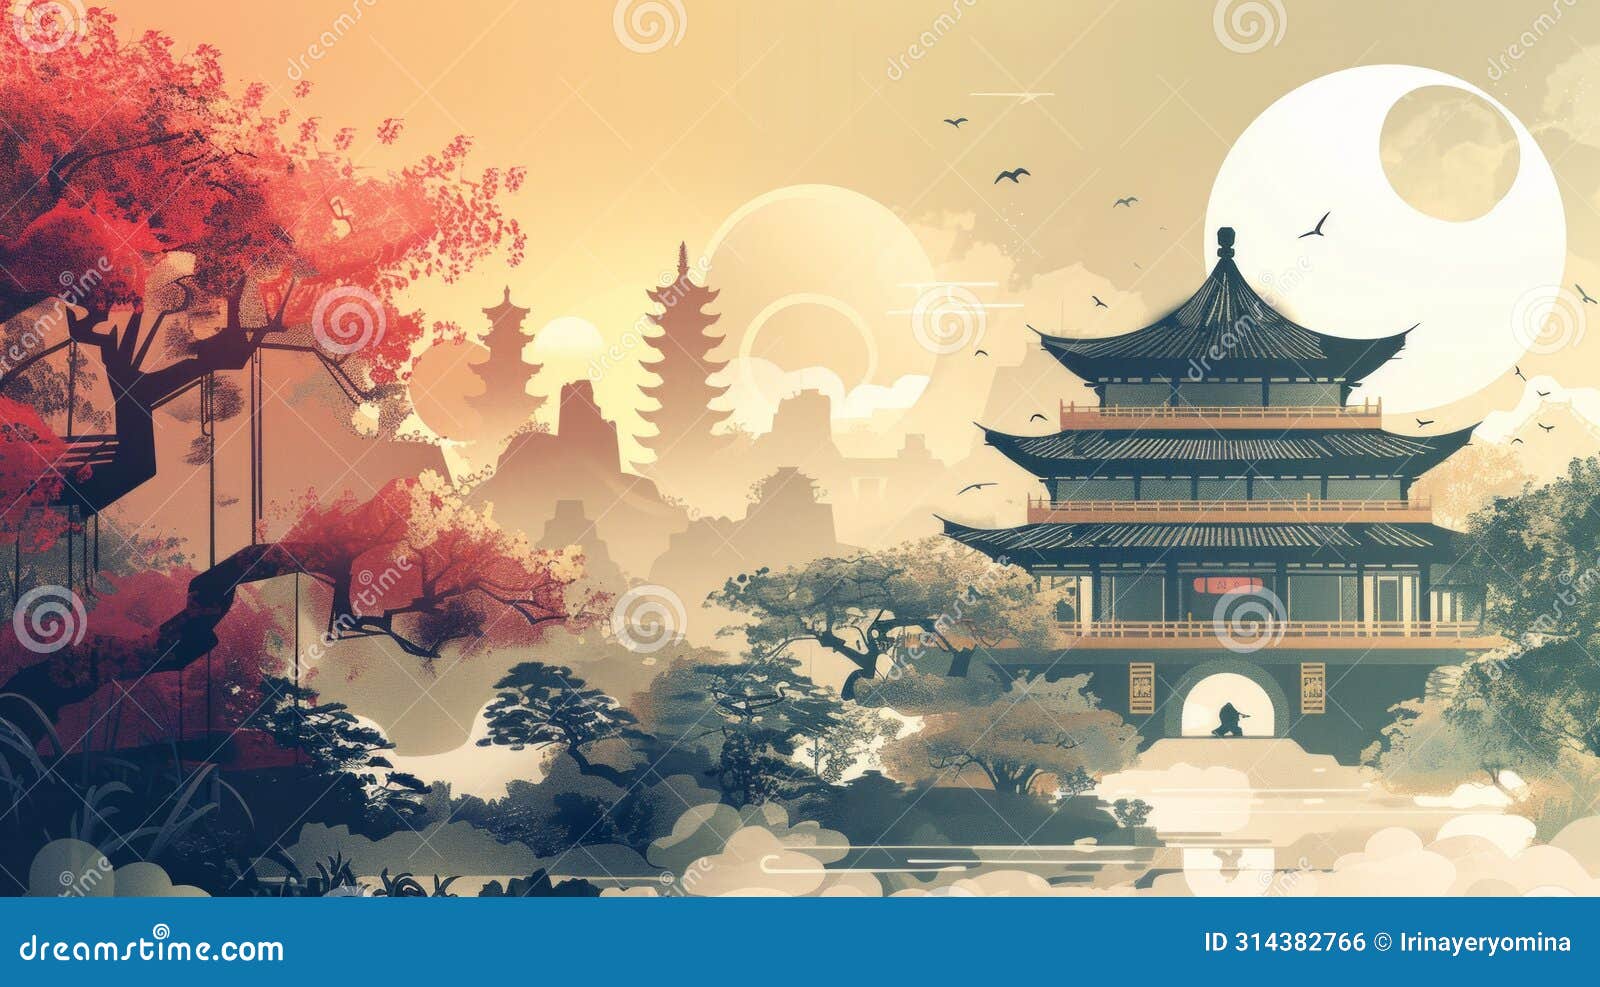 ancient chinese architecture in confucianism 